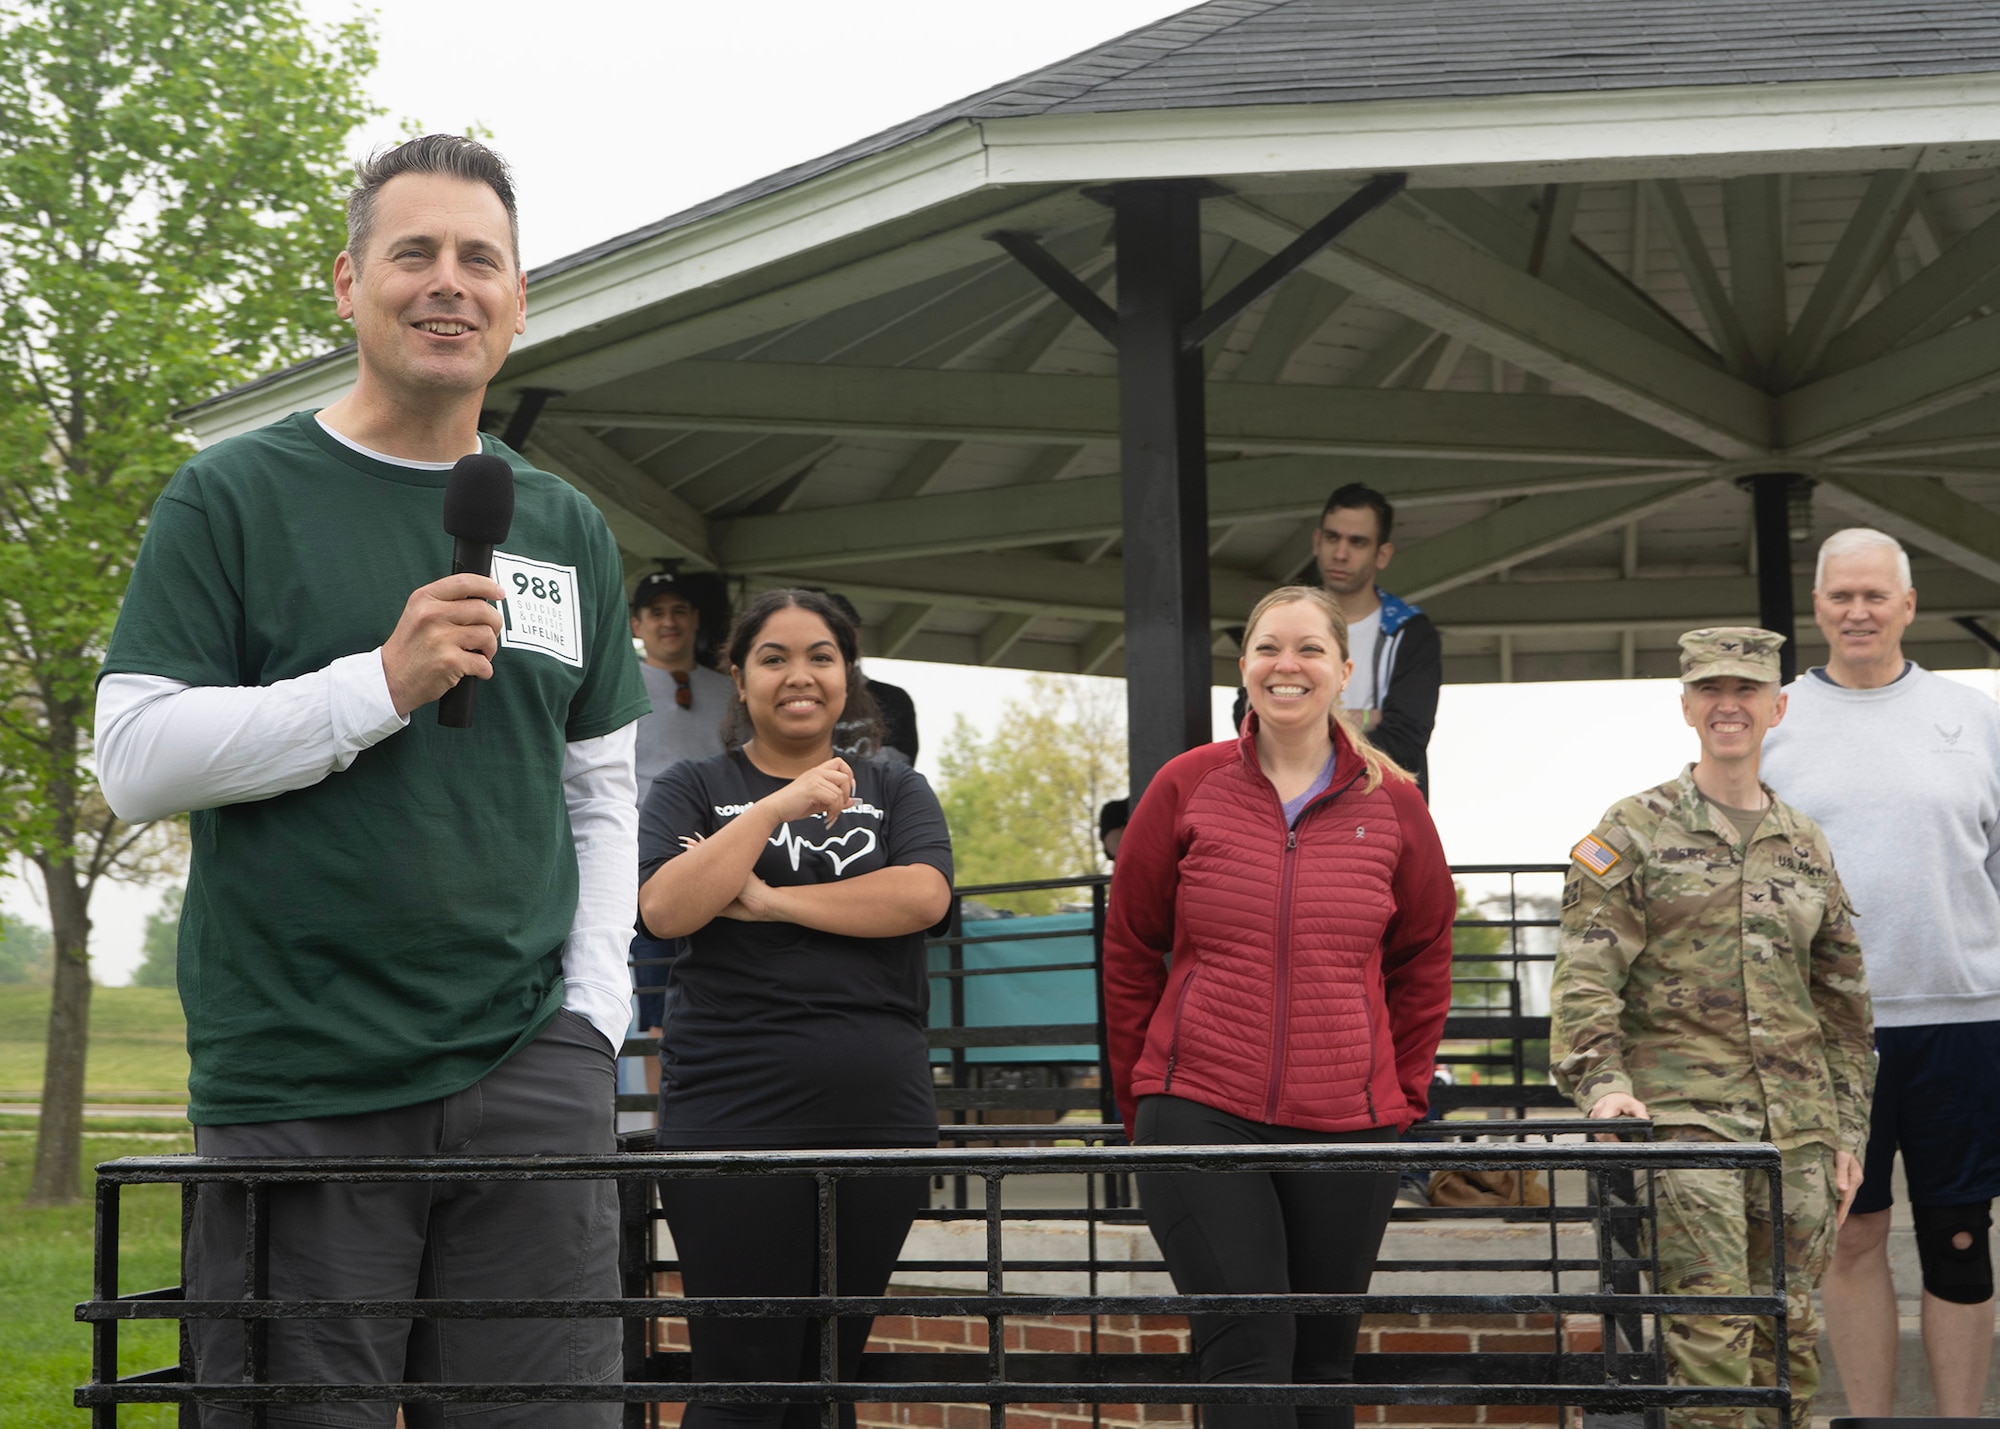 U.S. Air Force Col. Craig Miller, 70th Intelligence, Surveillance and Reconnaissance Wing commander, provides remarks during a Suicide Awareness Walk, April 21, 2023, at Fort George G. Meade, Maryland. Miller welcomed the participants to come together as a community in raising awareness on suicide prevention and pledge their support to resiliency, honoring the friends and battle buddies lost, and gaining the tools and resources necessary to support one another. (U.S. Air Force photo by Staff Sgt. Kevin Iinuma)